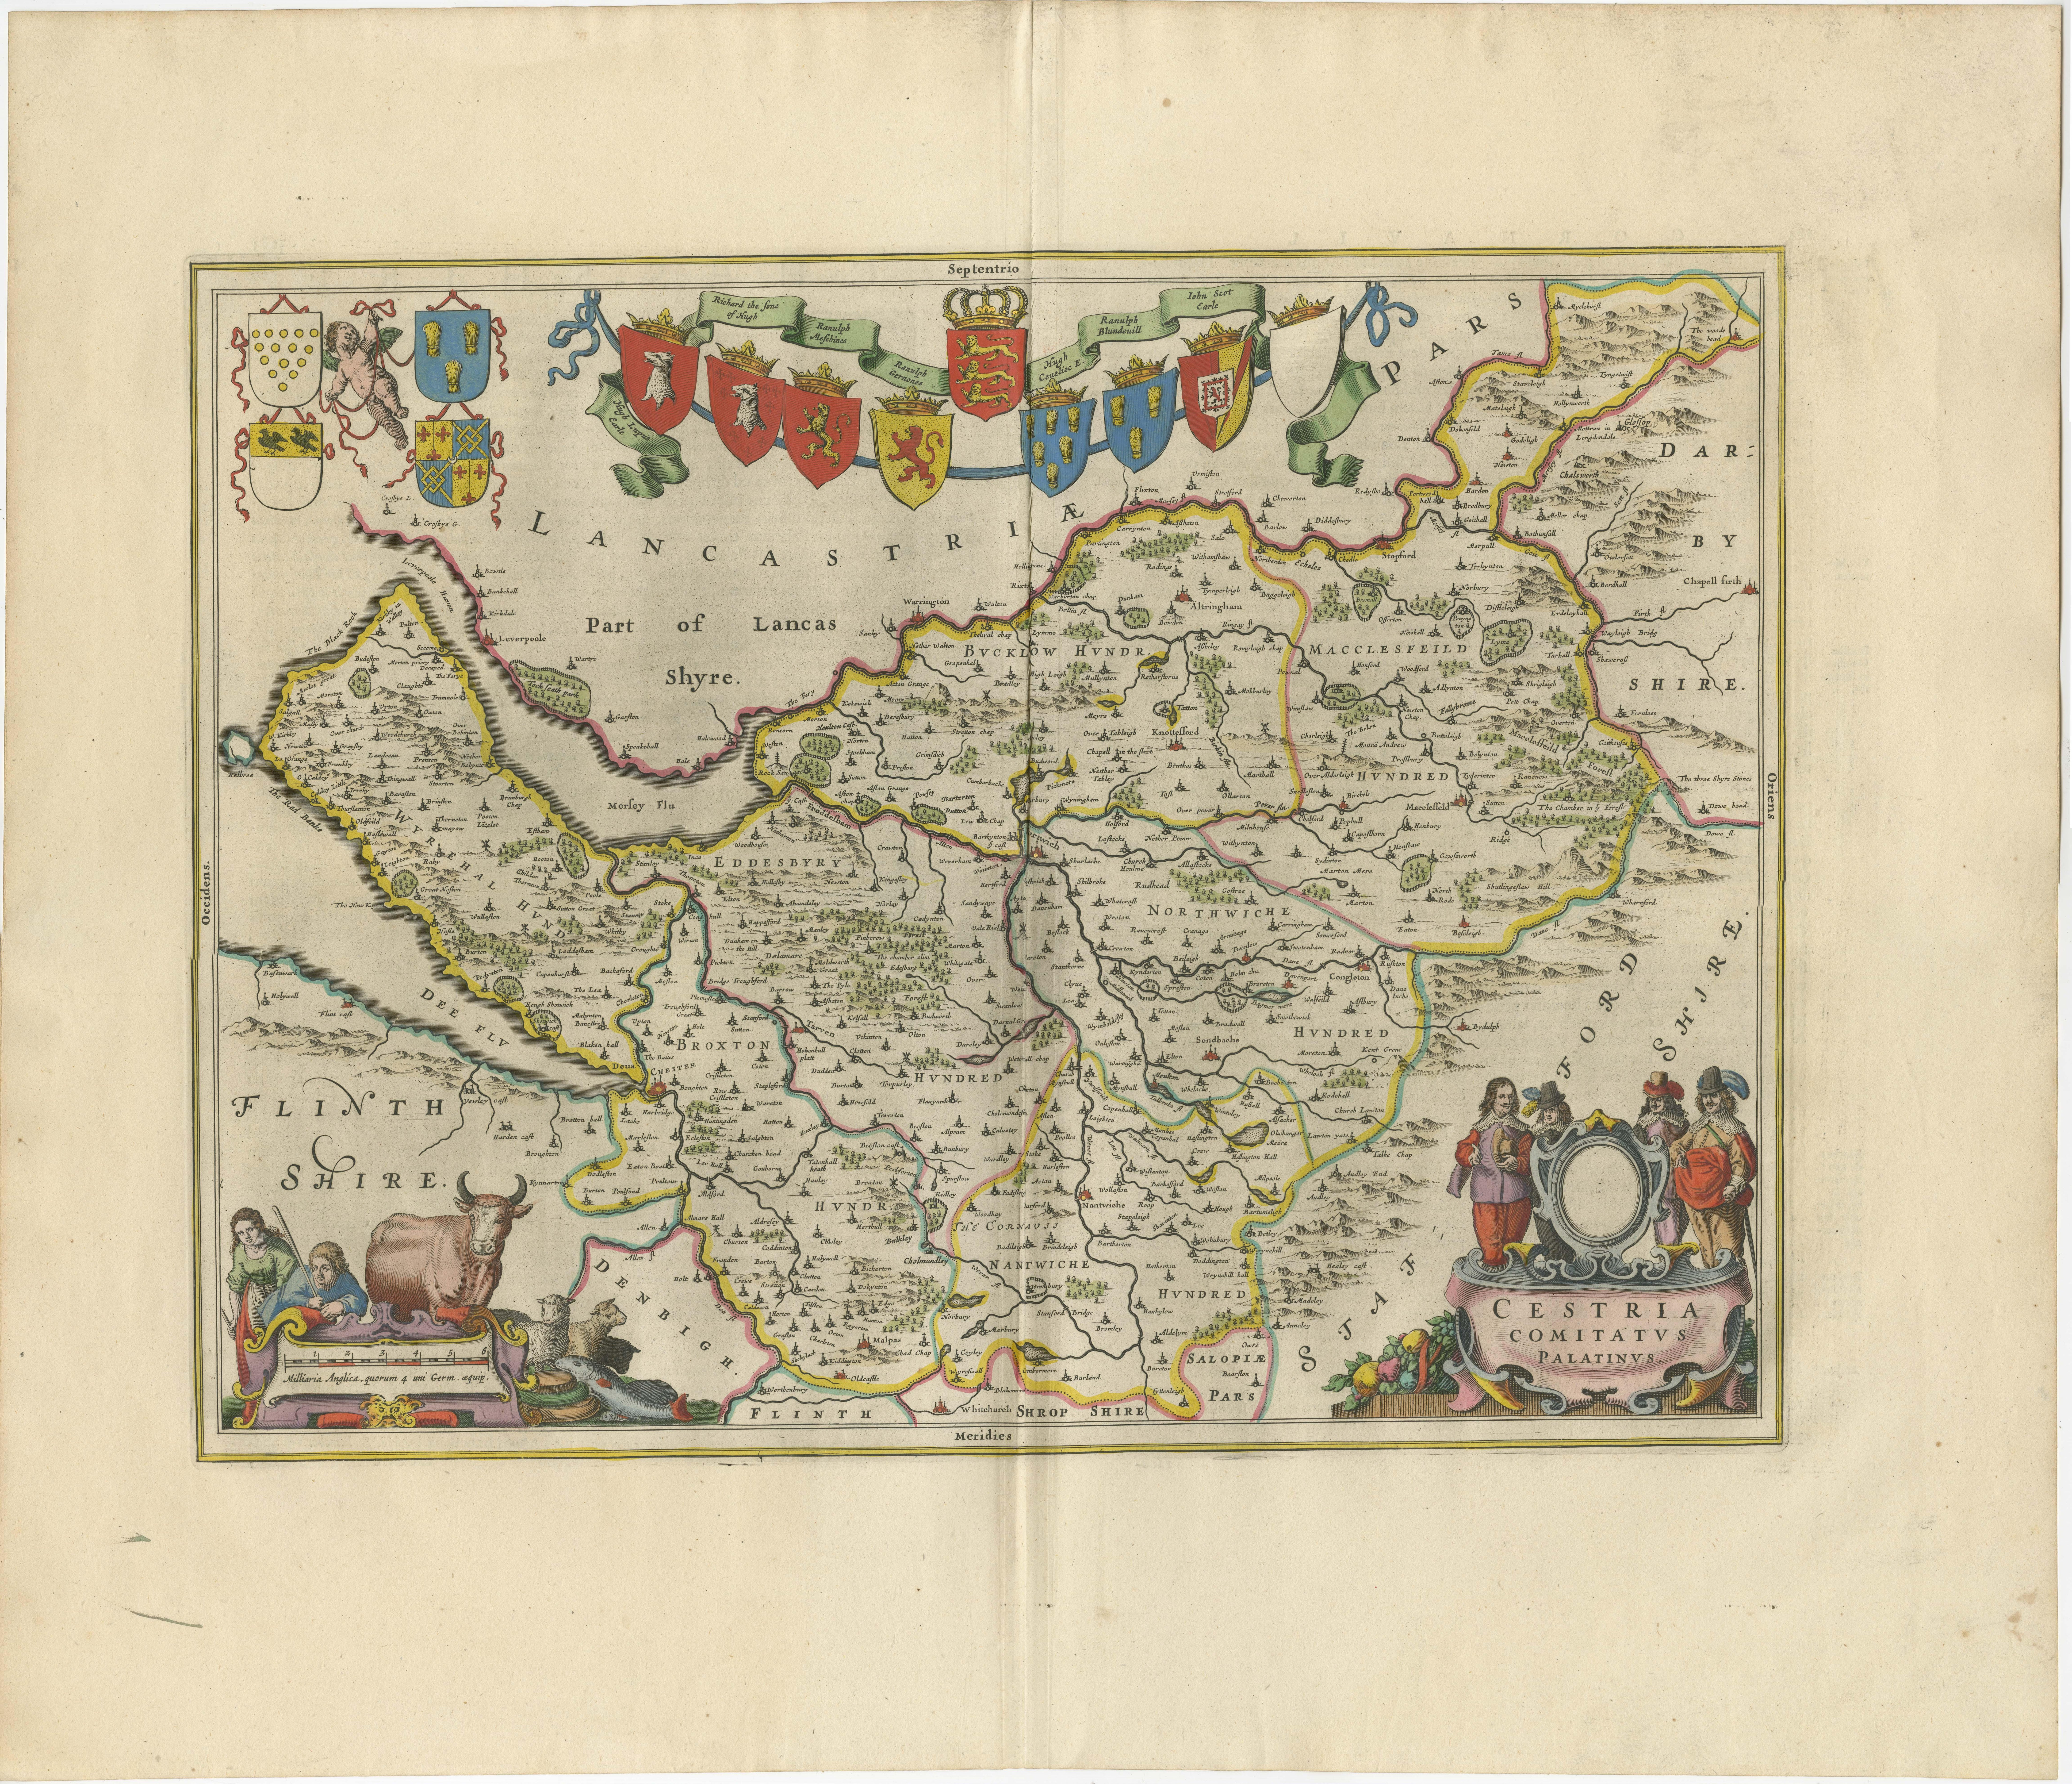 Antique map titled 'Cestria comitatus Palatinus'. Original old map of Cheshire, Northwest England. Published circa 1665 by J. Blaeu. Willem Jansz. Blaeu and his son Joan Blaeu are the most widely known cartographic publishers of the seventeenth